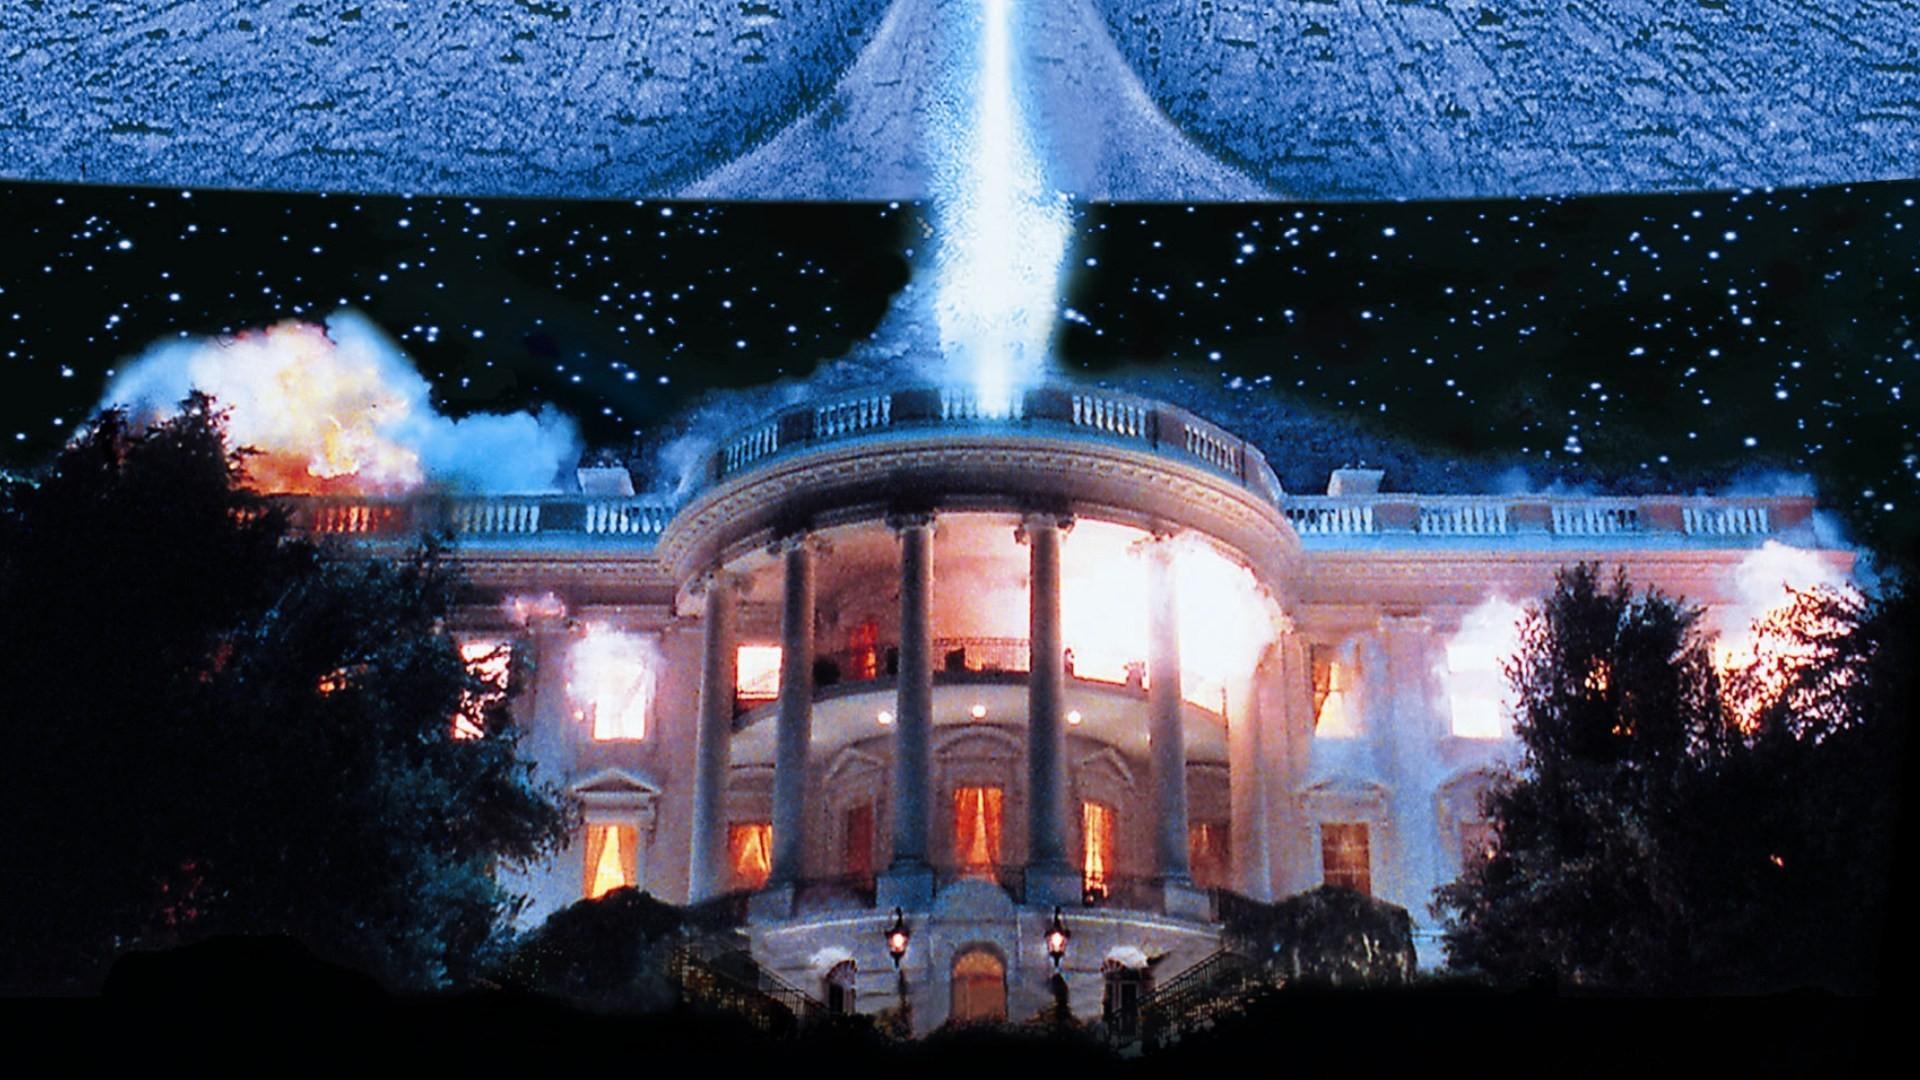 A scene from the 1996 science fiction film Independence Day, where aliens destroy the White House